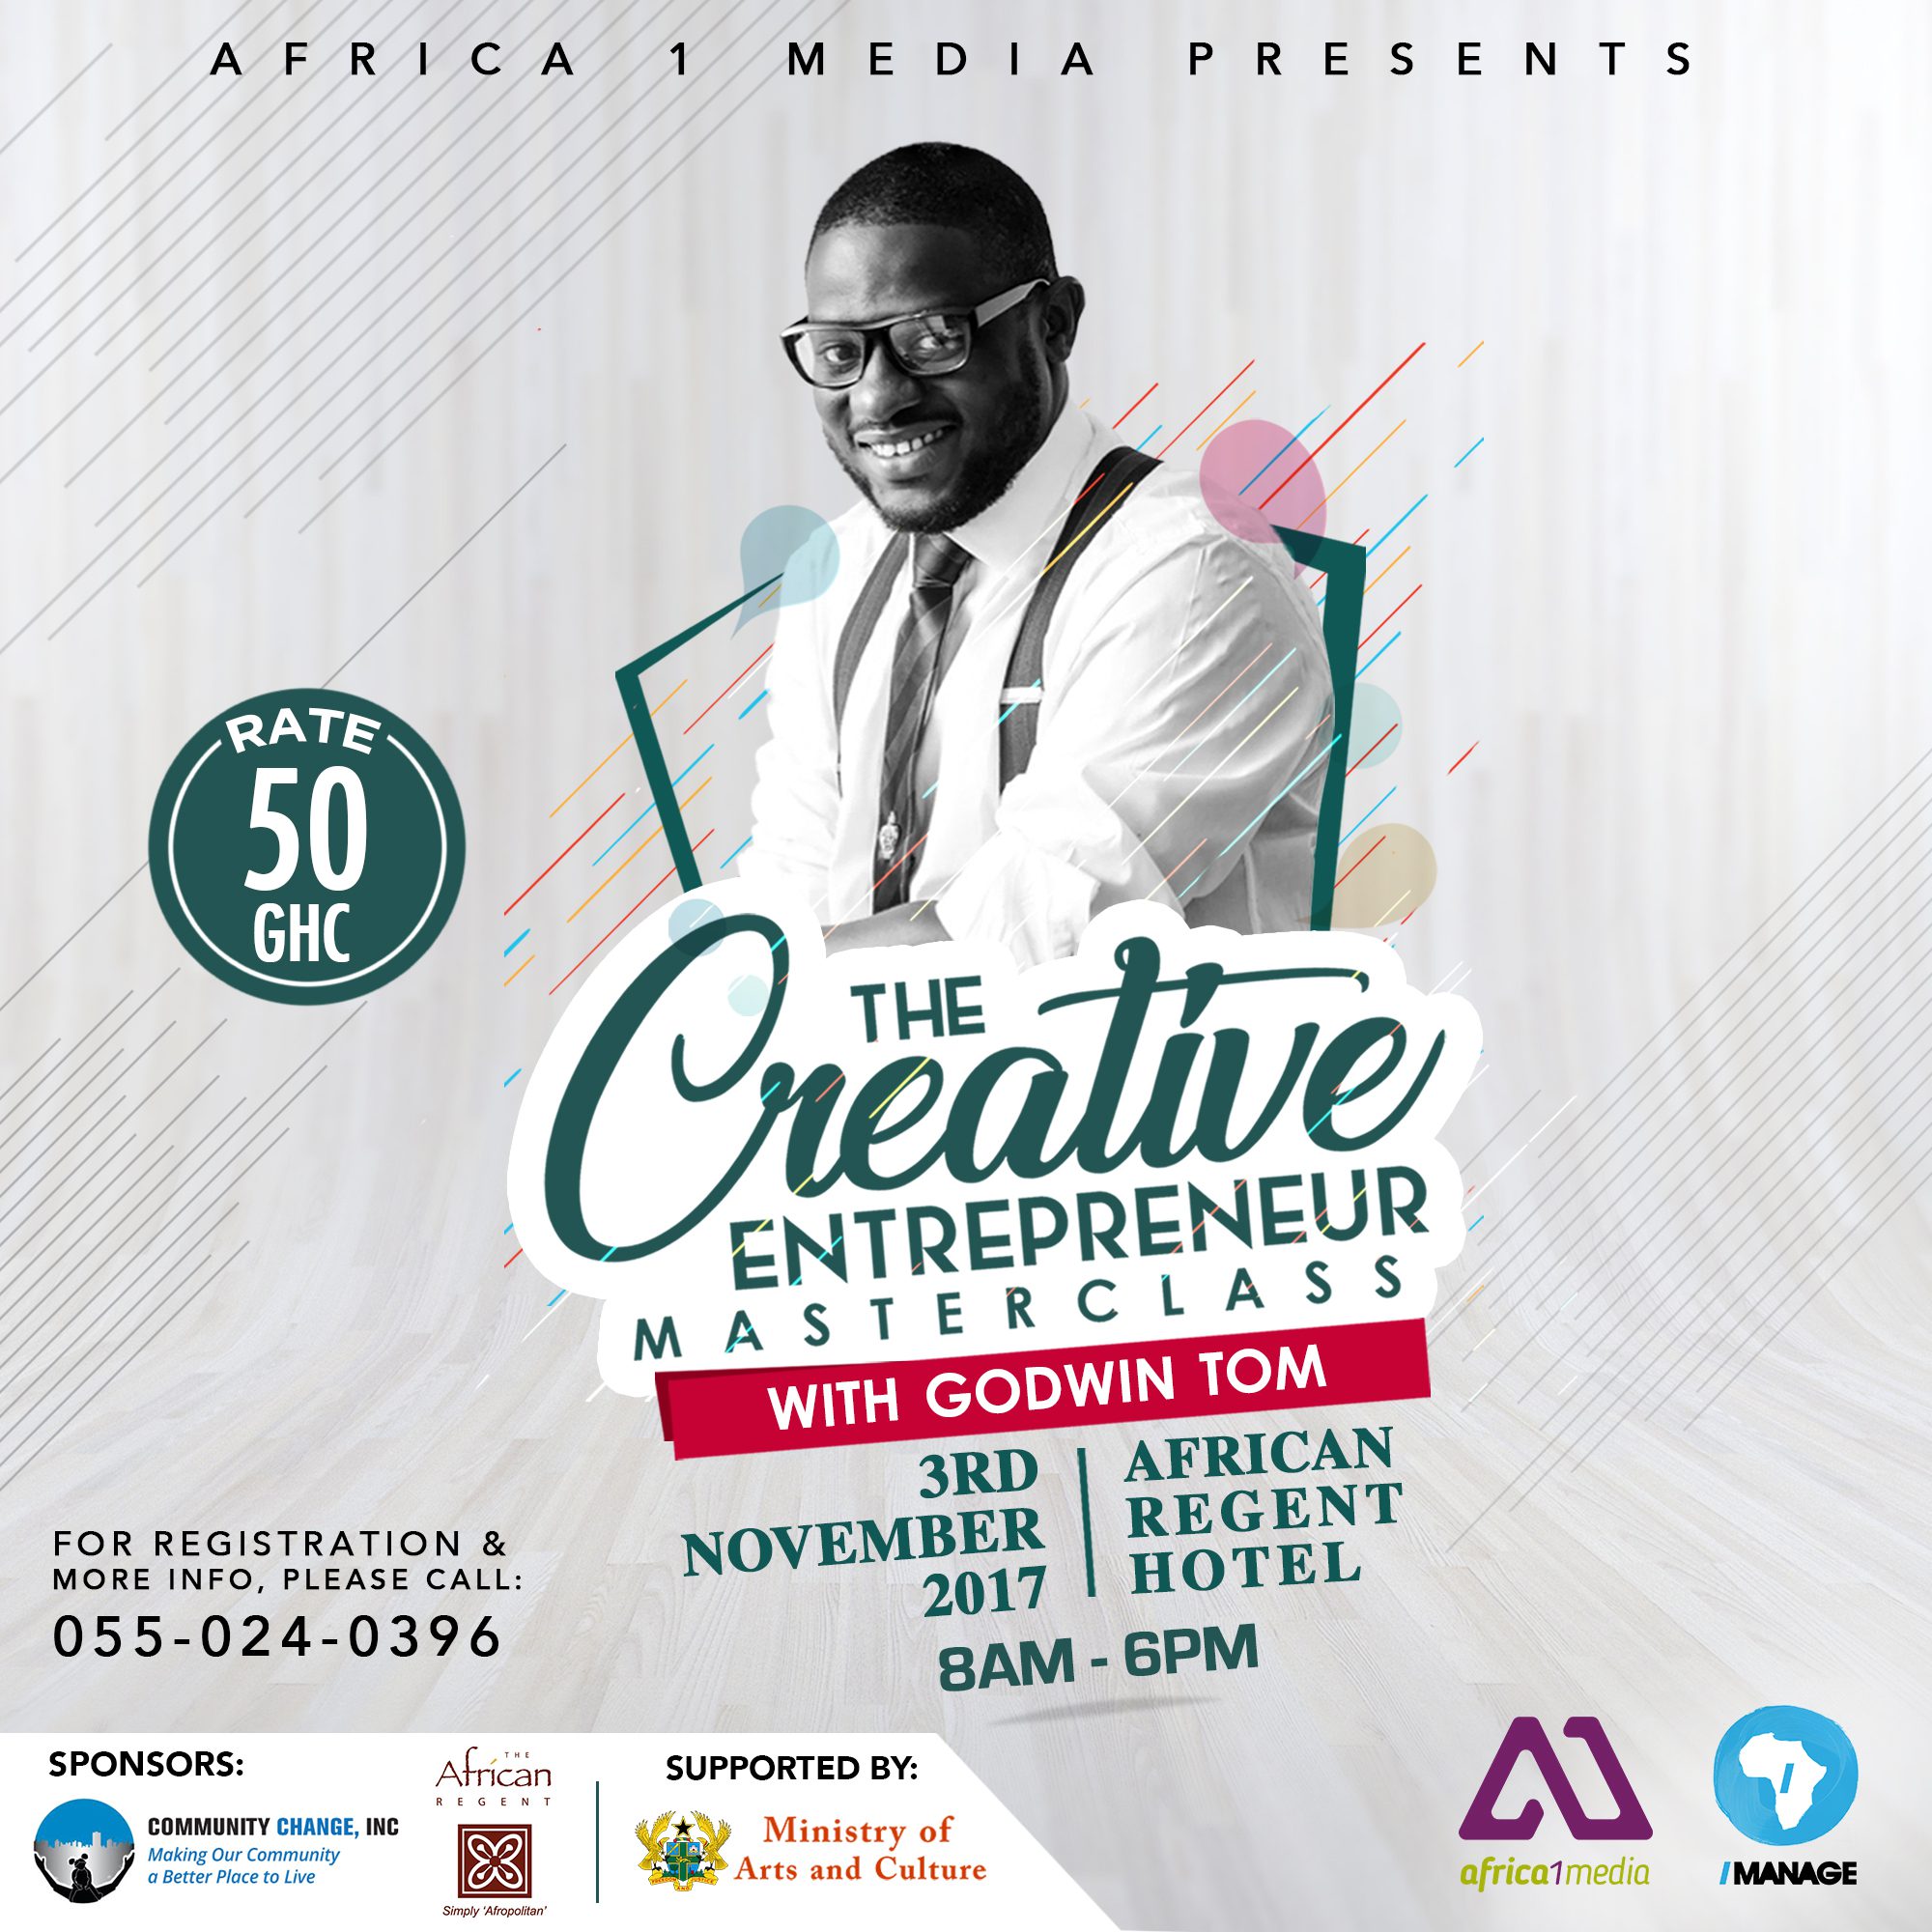 Ministry of Tourism, Culture & Creative Arts partners Africa 1 Media and Godwin Tom for Creative Entrepreneur Masterclass